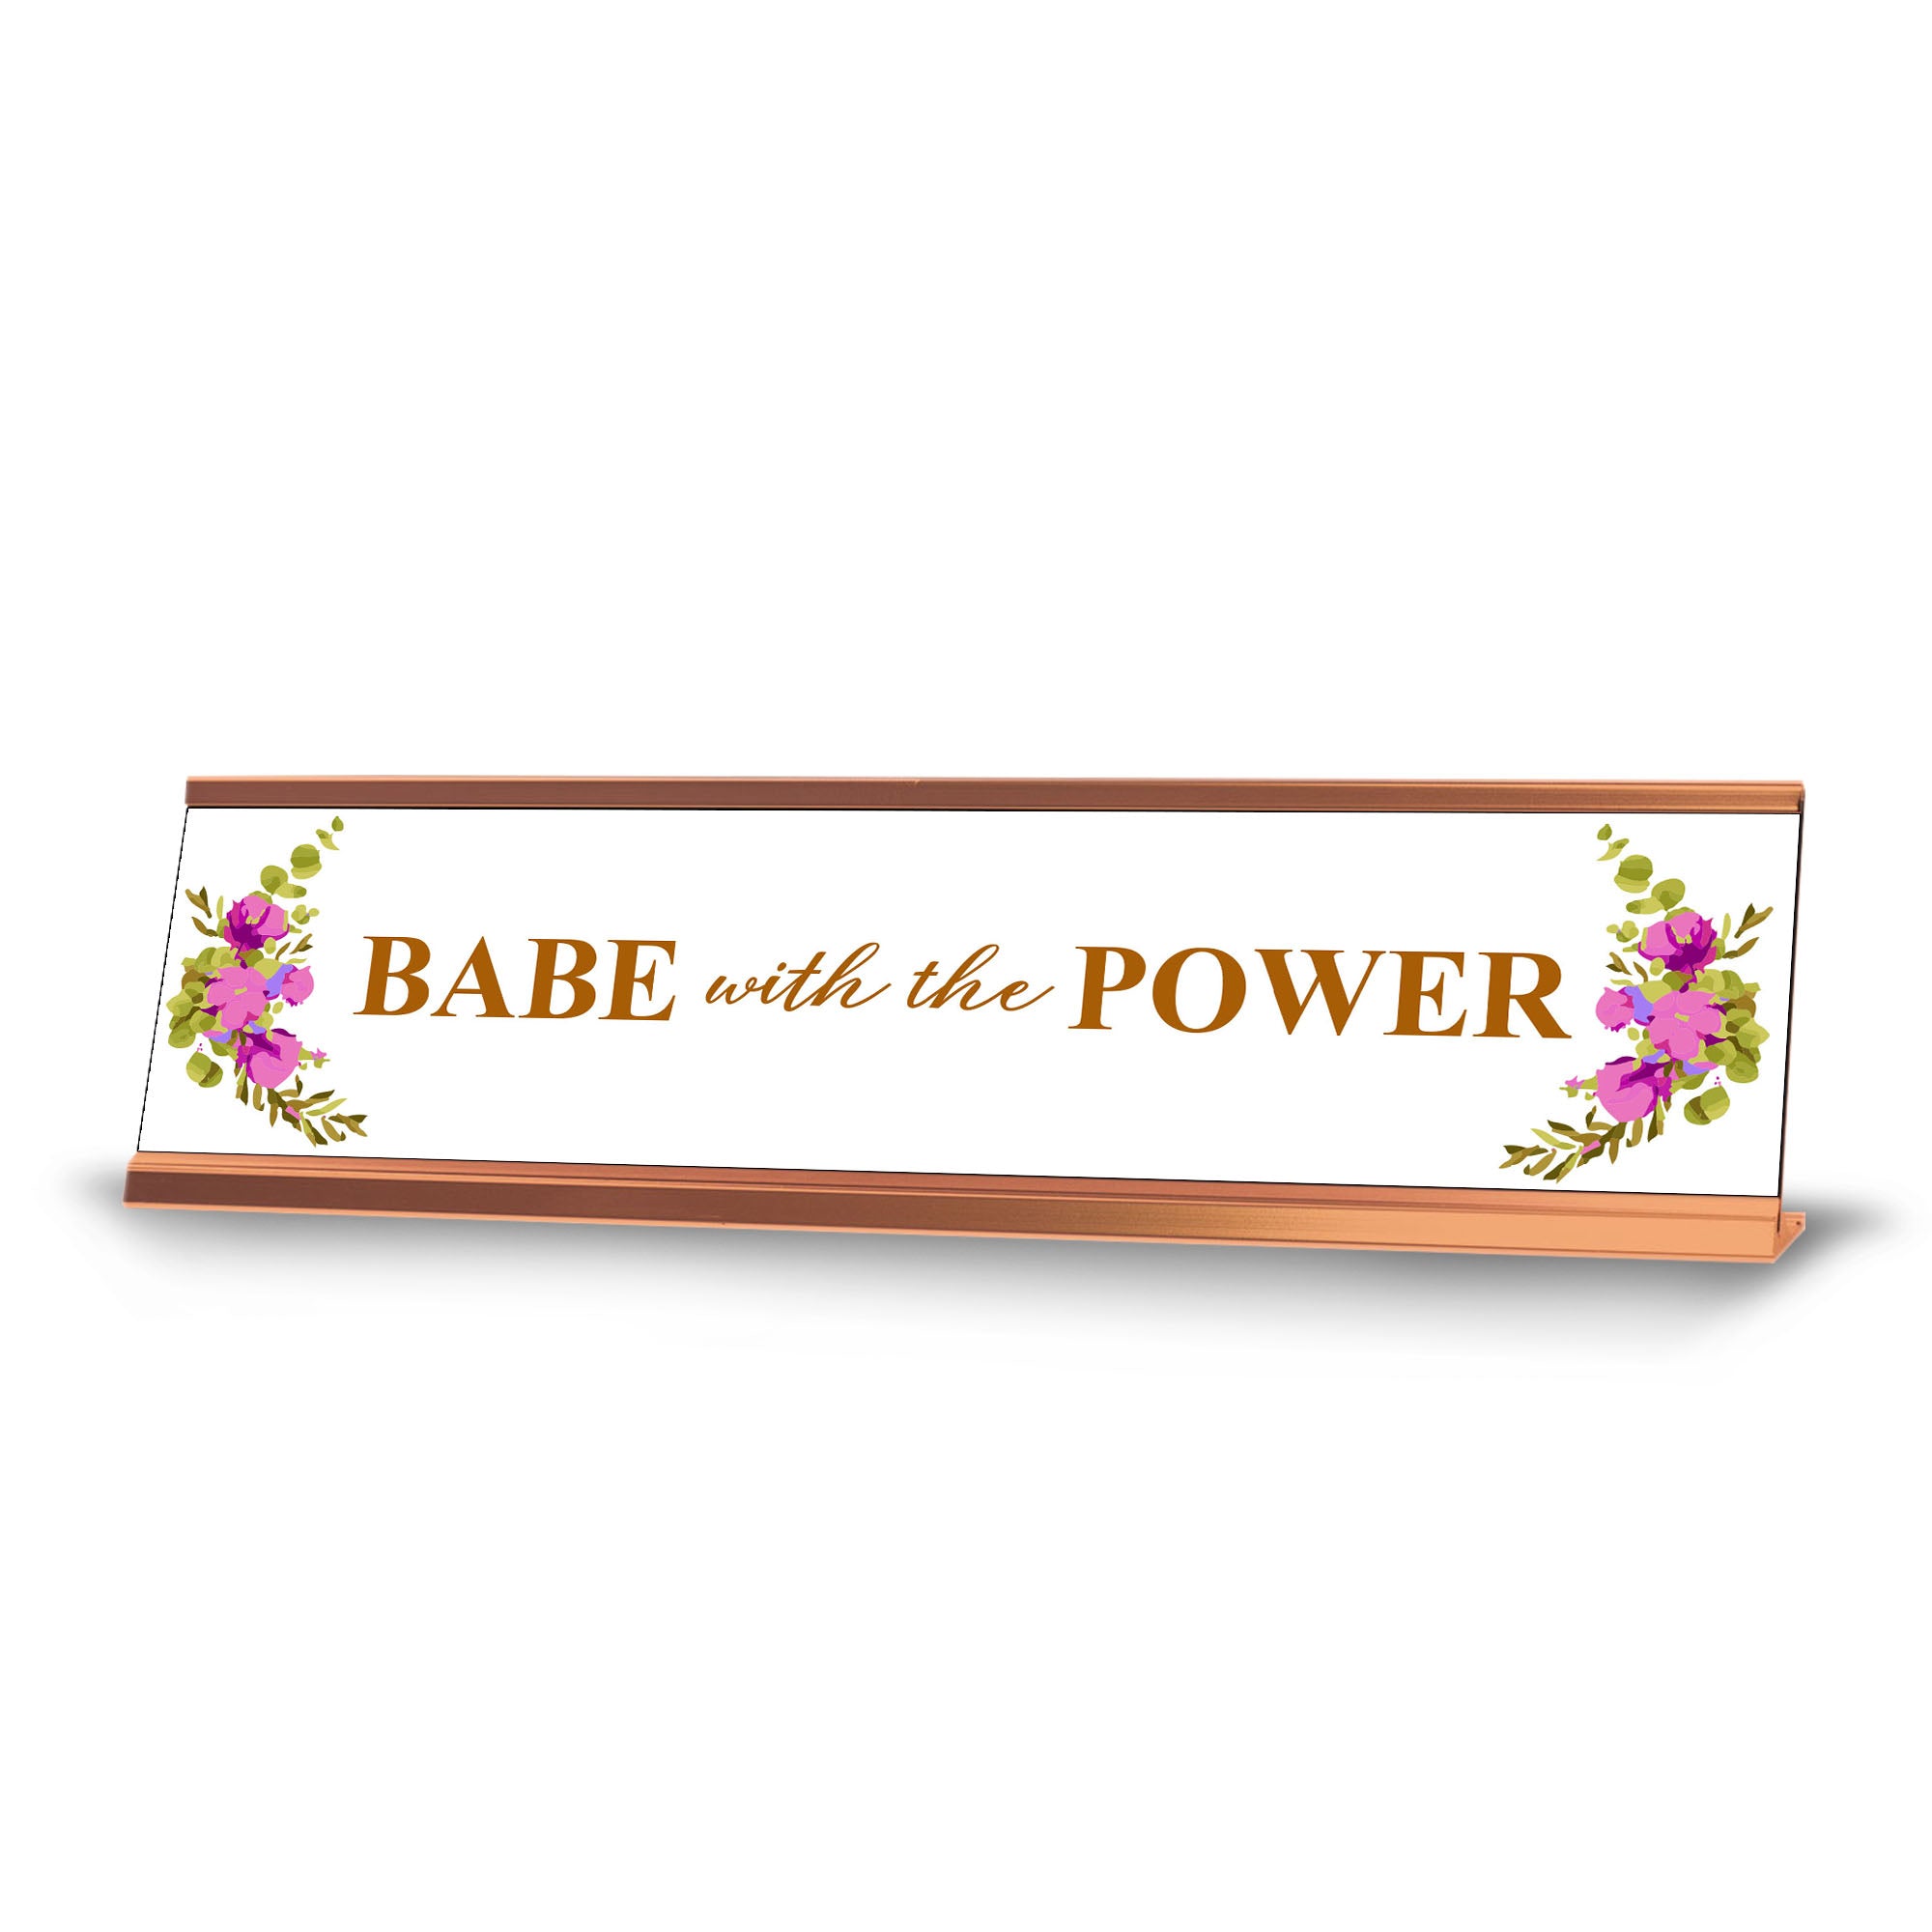 Babe with the Power, Rose Gold Novelty Novelty Nameplate Desk Sign (2 x 8")